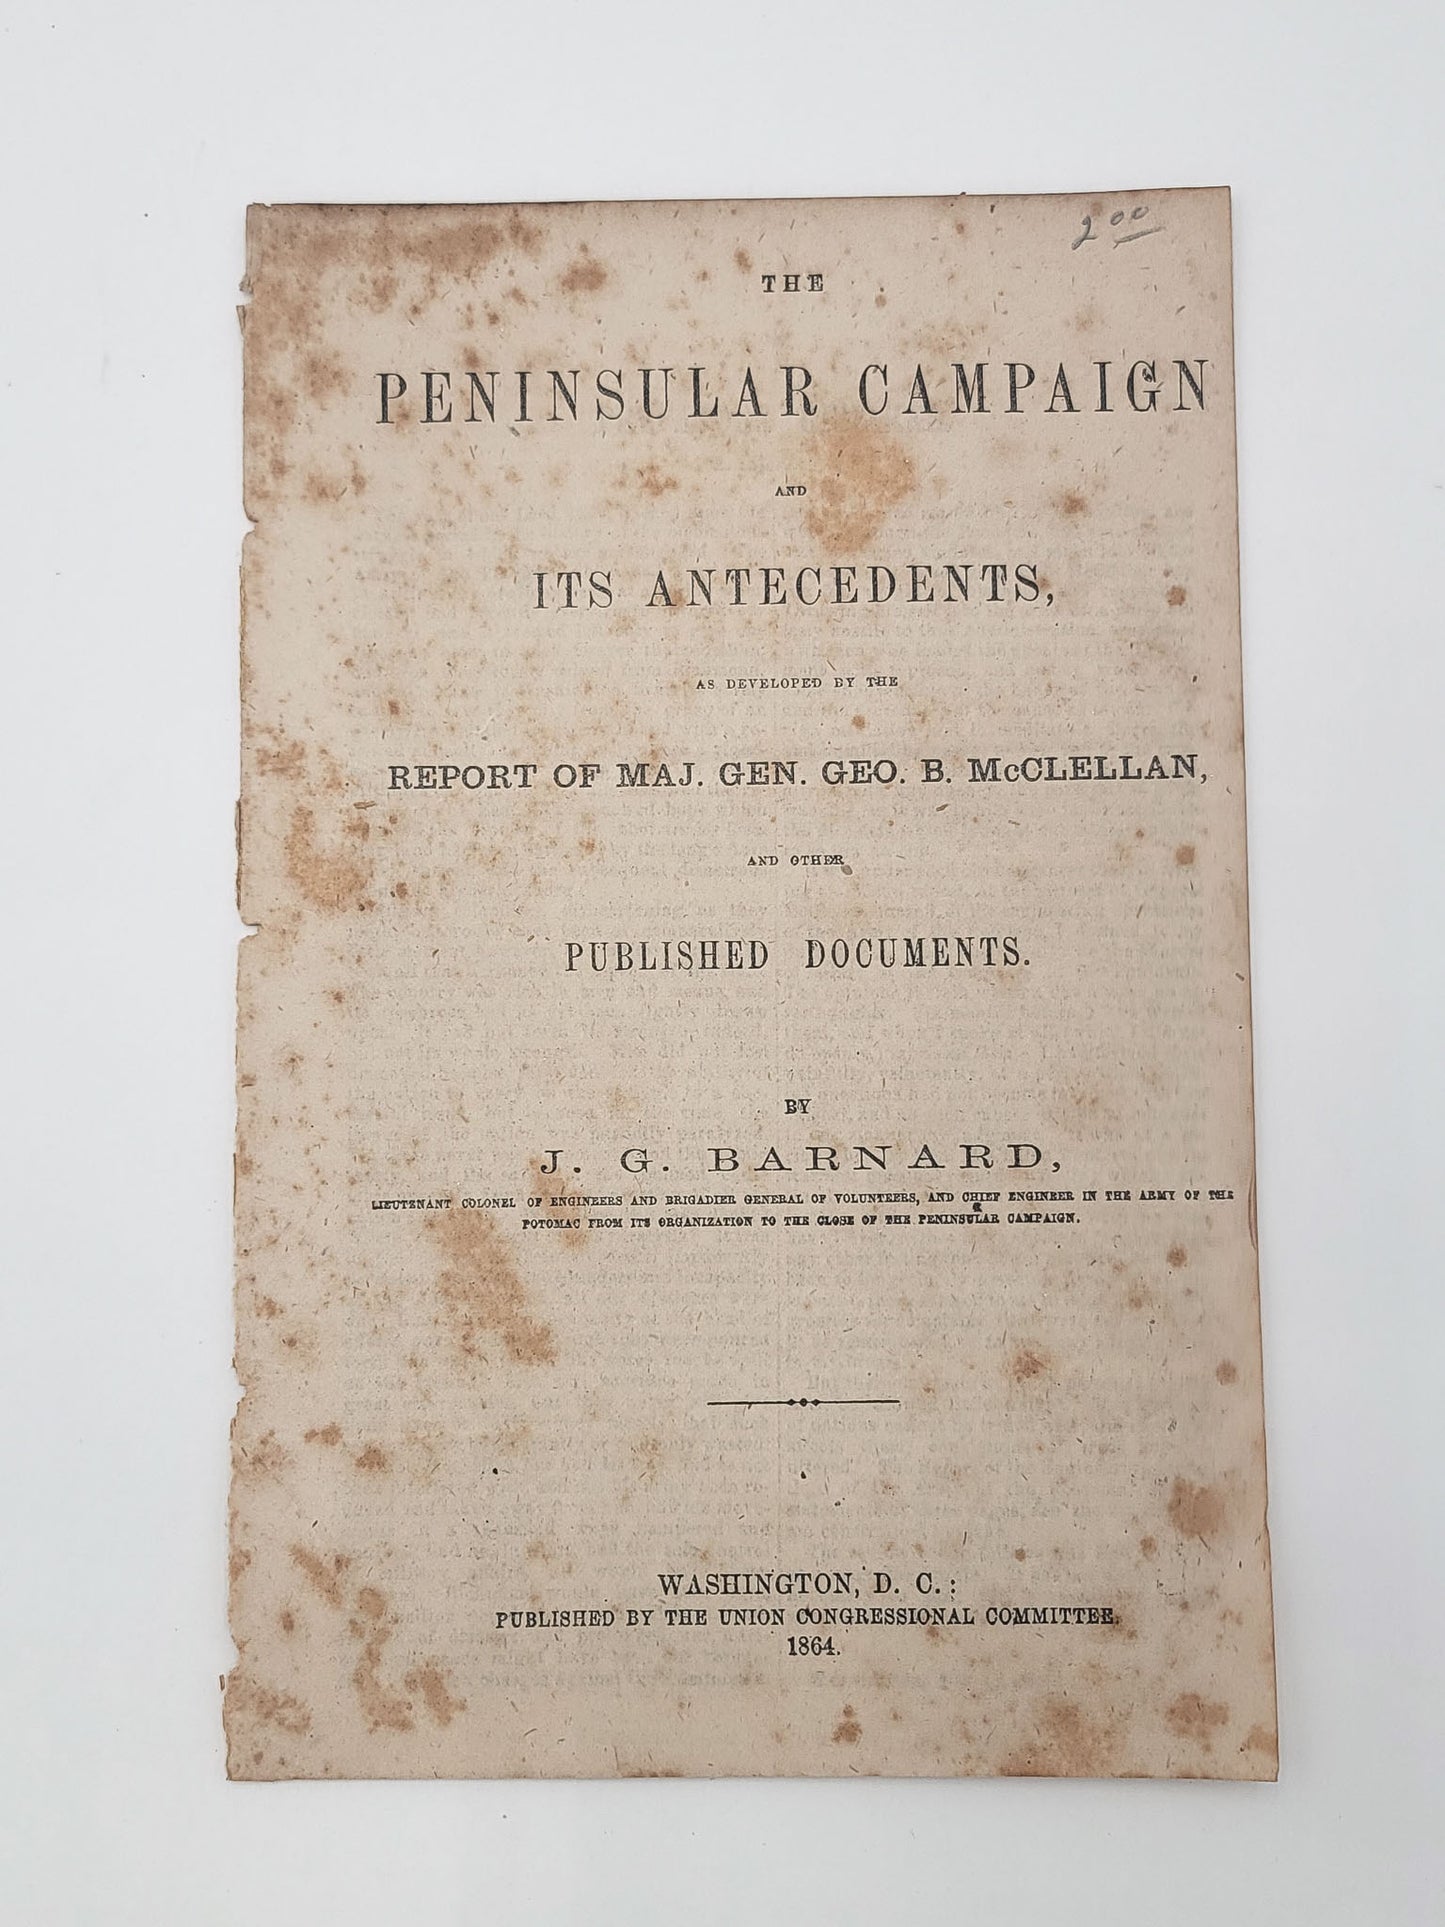 1864 Union Presidential Campaign &amp; Documents Peninsular Campaign and it's Antecedents